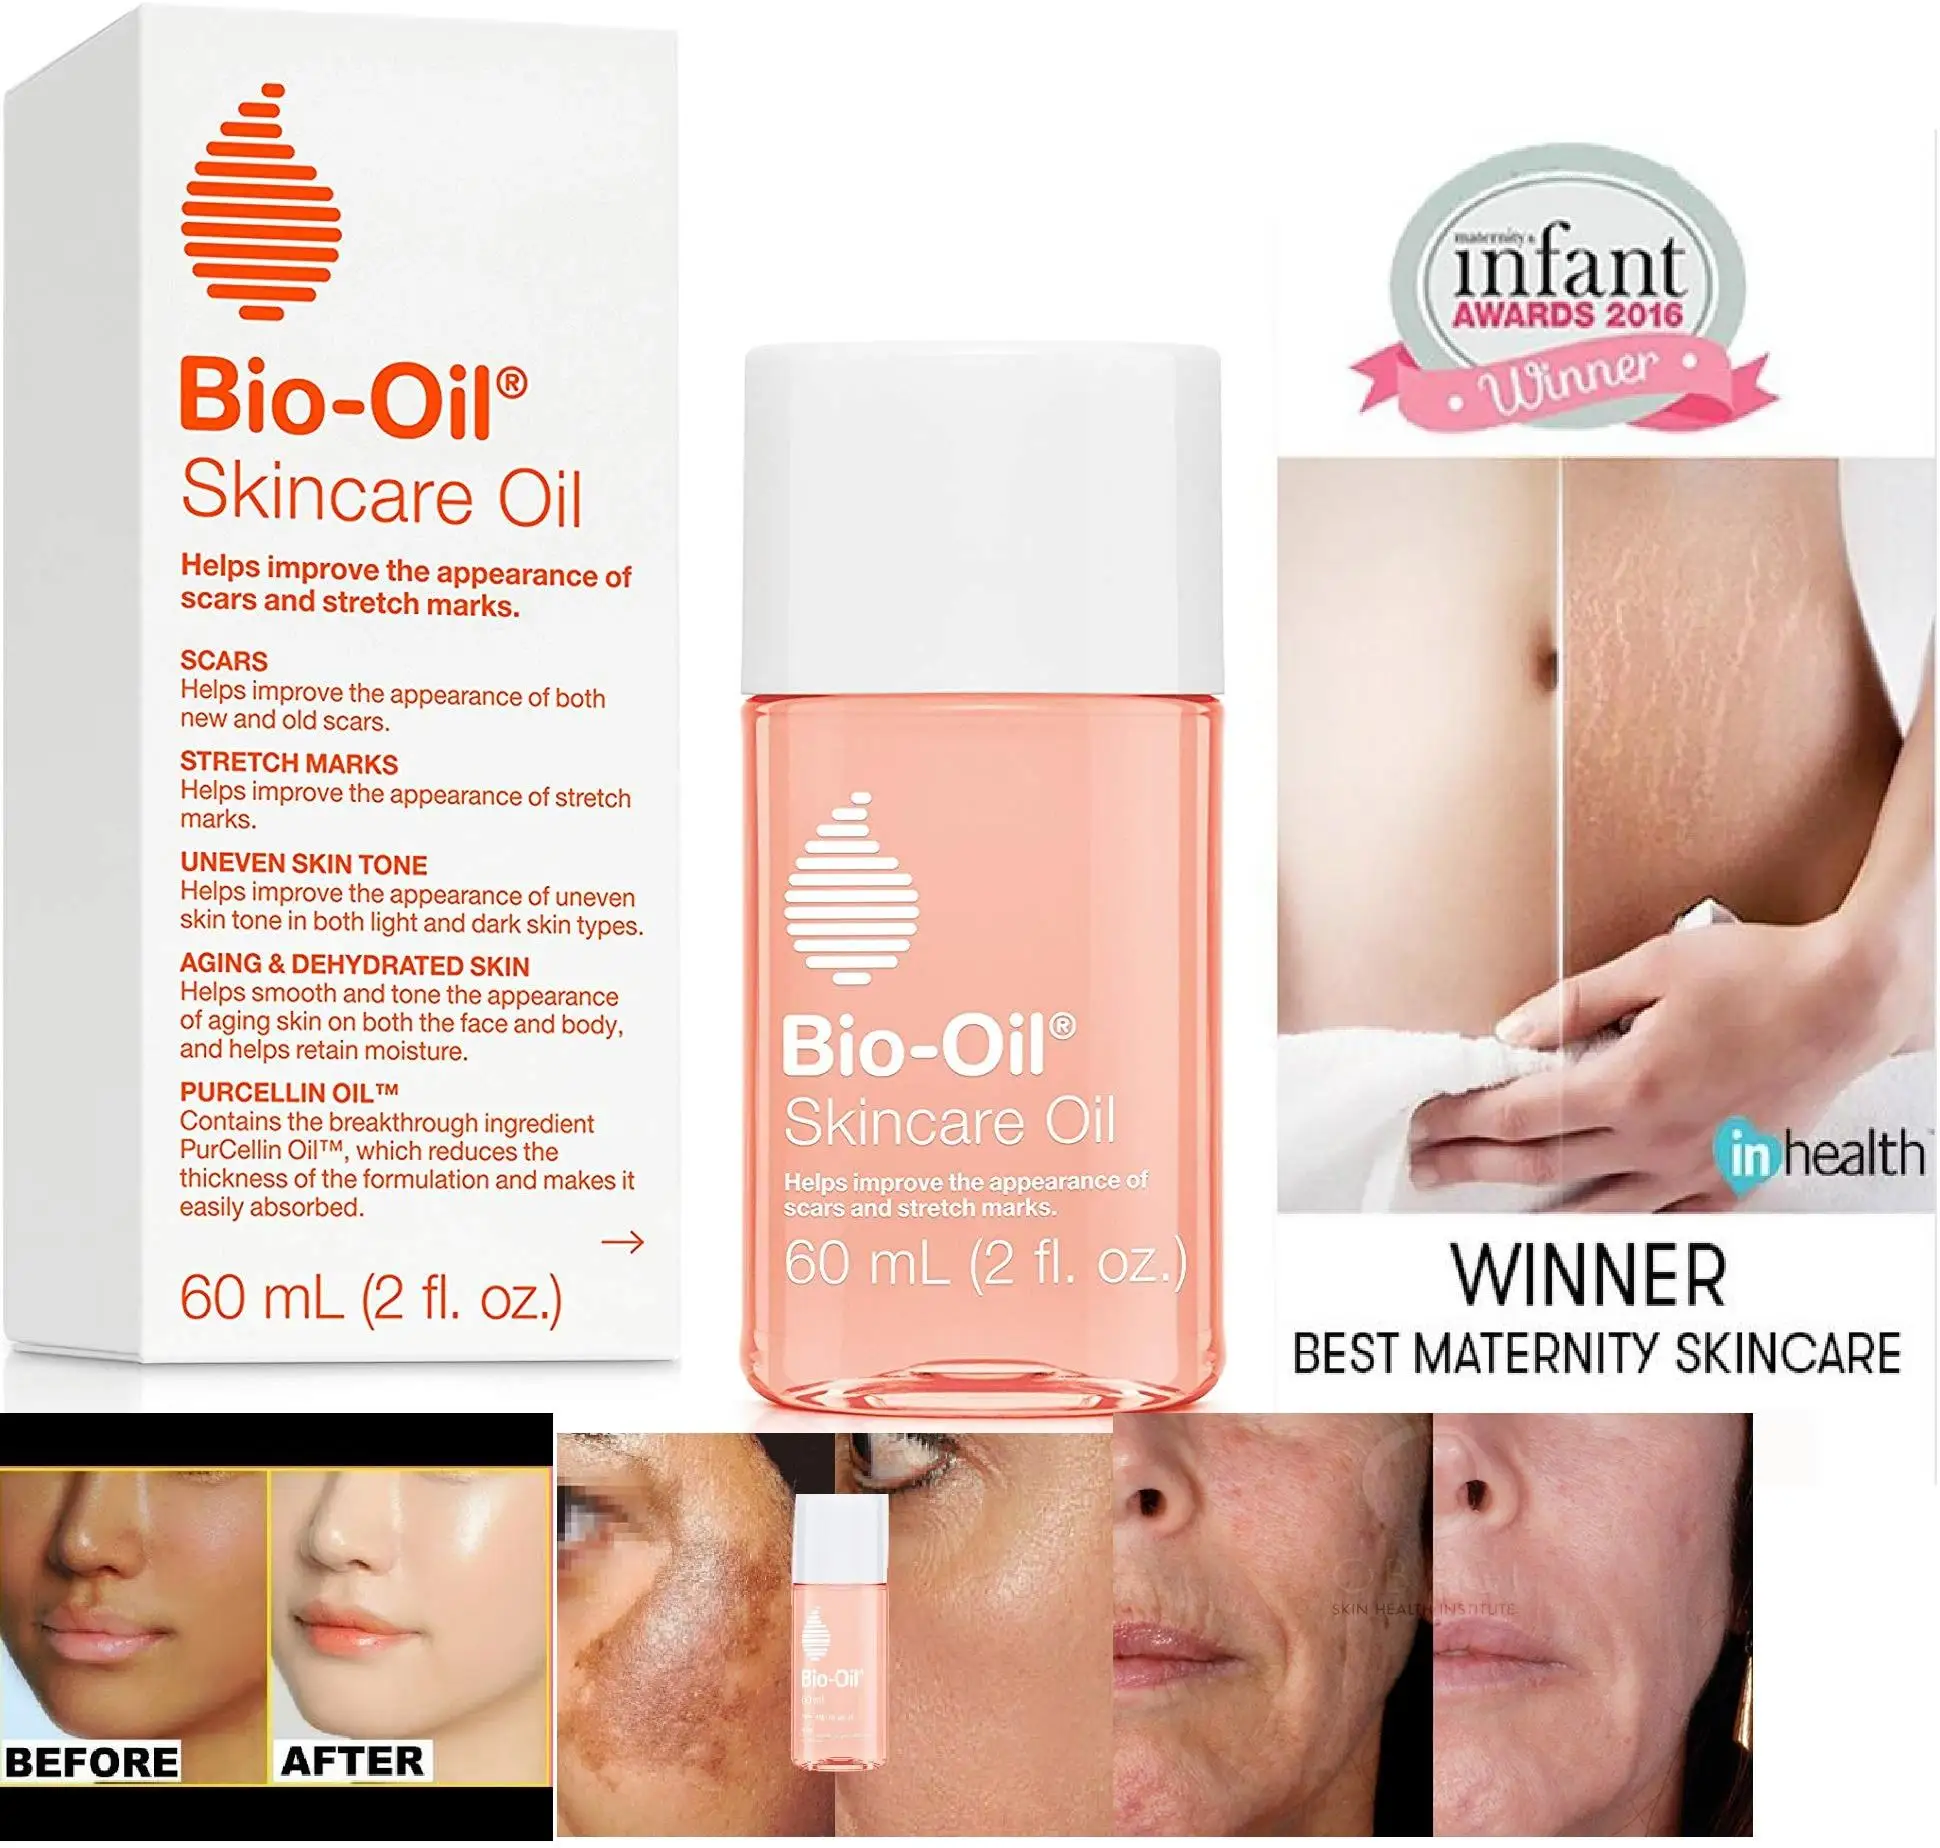 Bio-Oil Skin Care Oil Reduction in Stretch Marks in 8 Weeks 125ml X 2 PCS enlarge